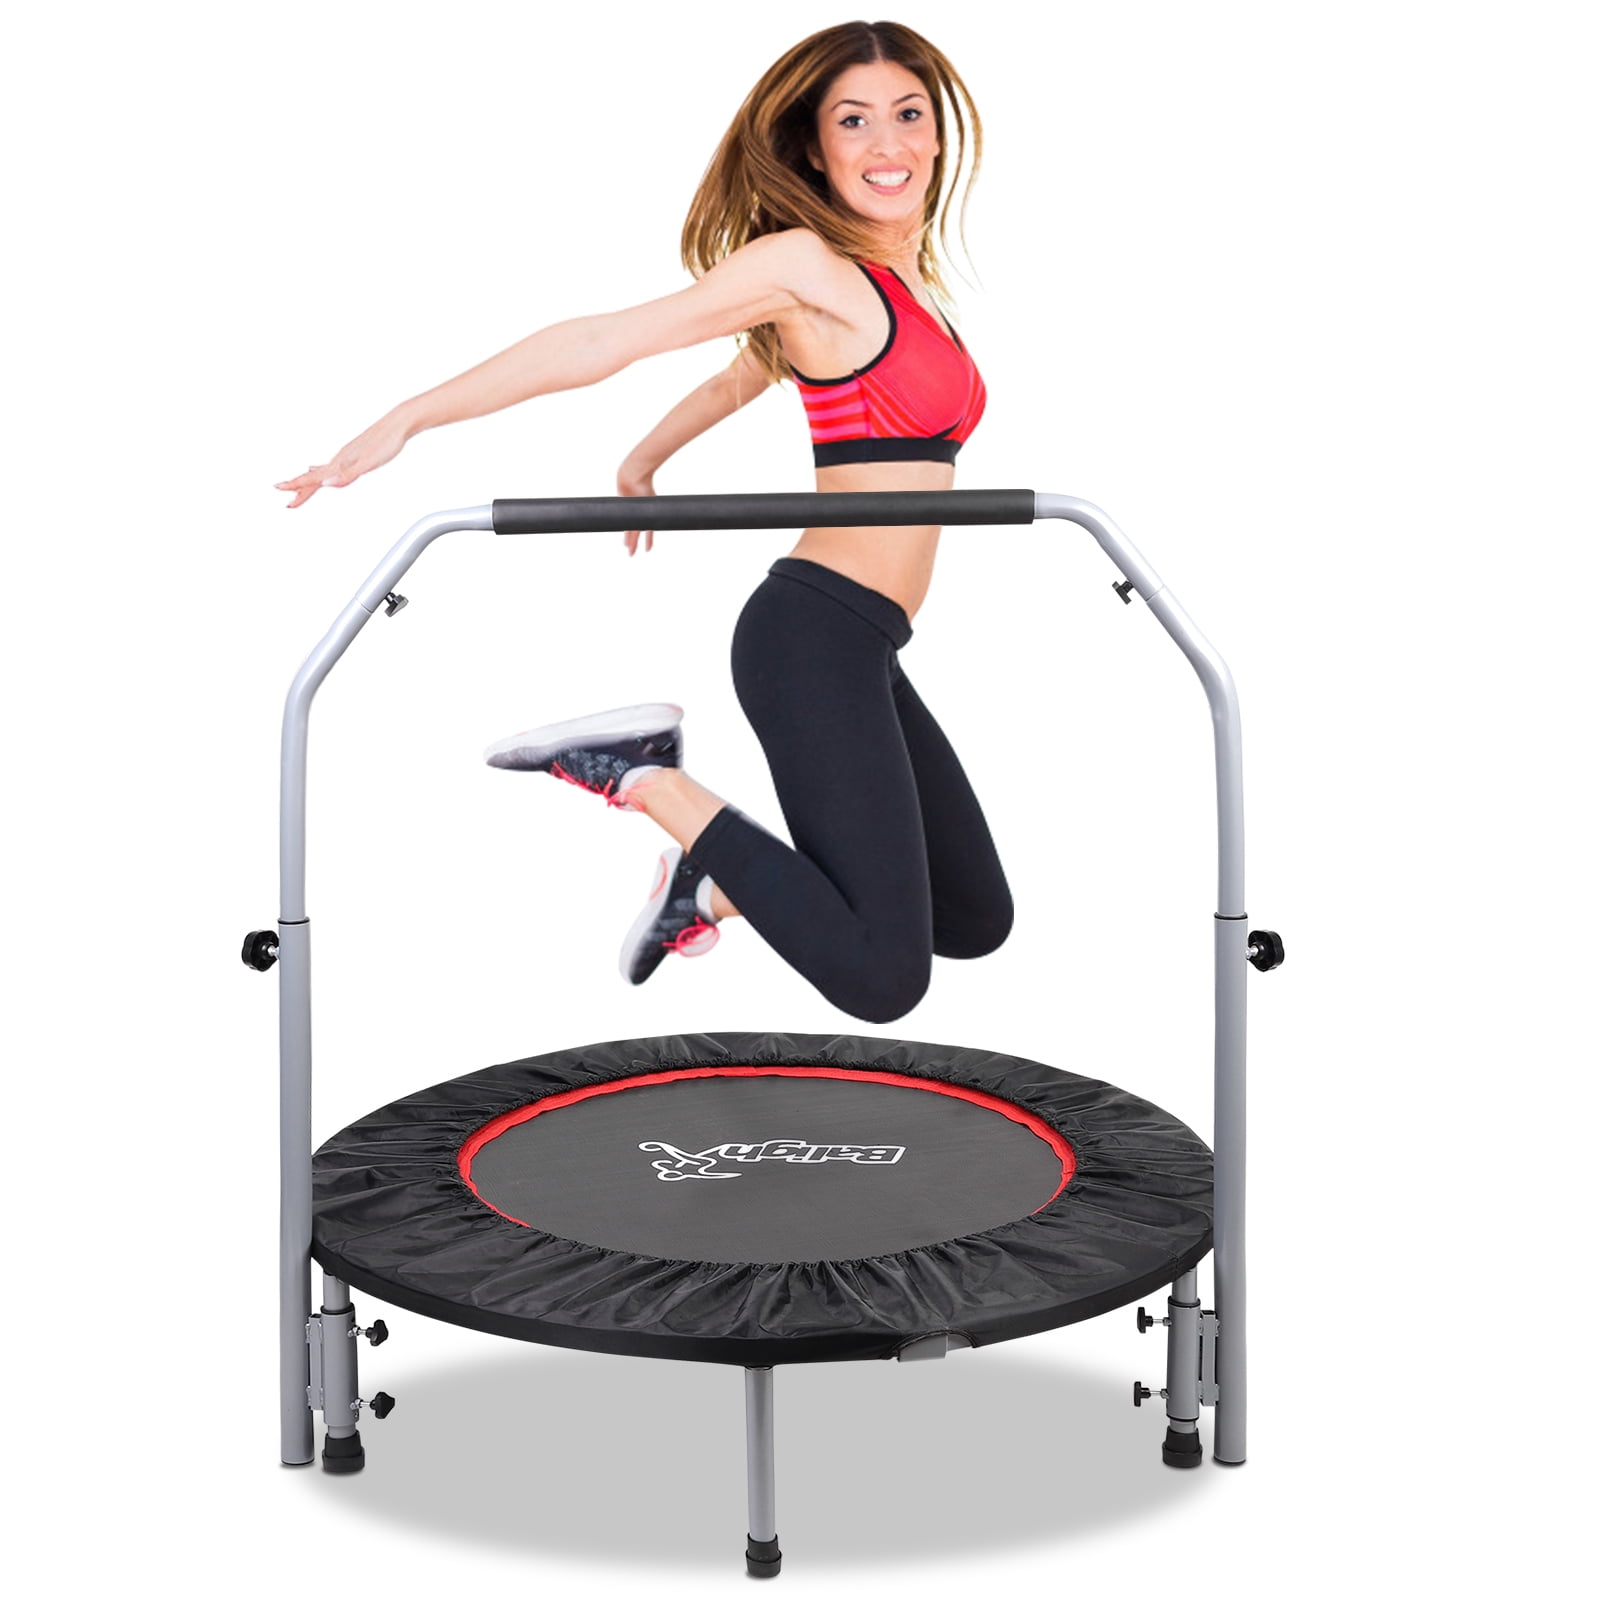 Max Load 400 lbs Trampolines Lxn 48-inch Black Silent Mini Fitness with Pull band Indoor for Adults Perfect Urban Cardio Workout Home Trainer 